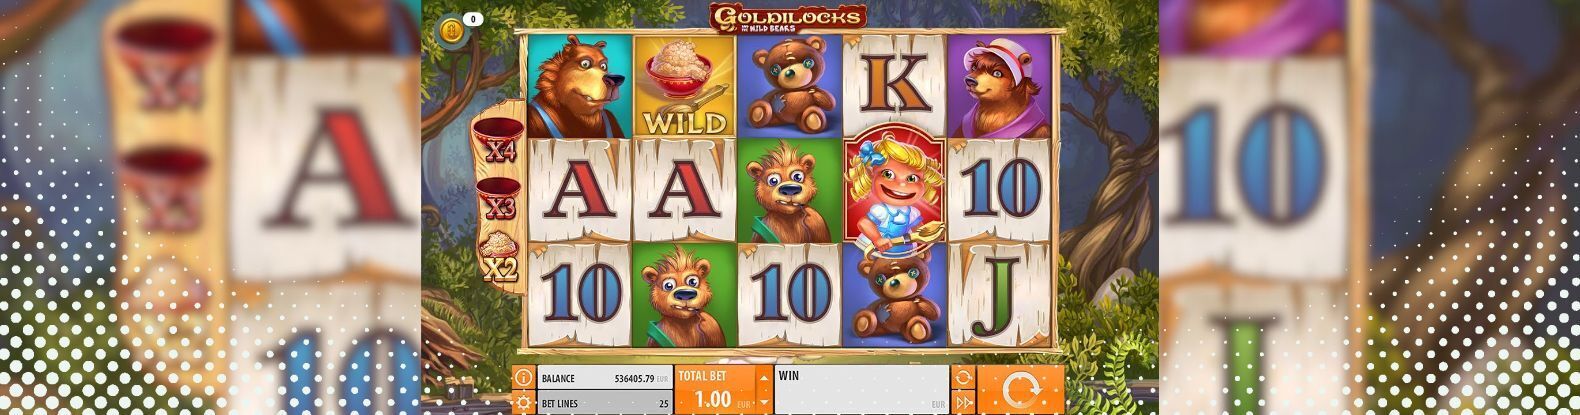 This is a pic of Goldilocks and the wild bears Pokies Game by Quickspin